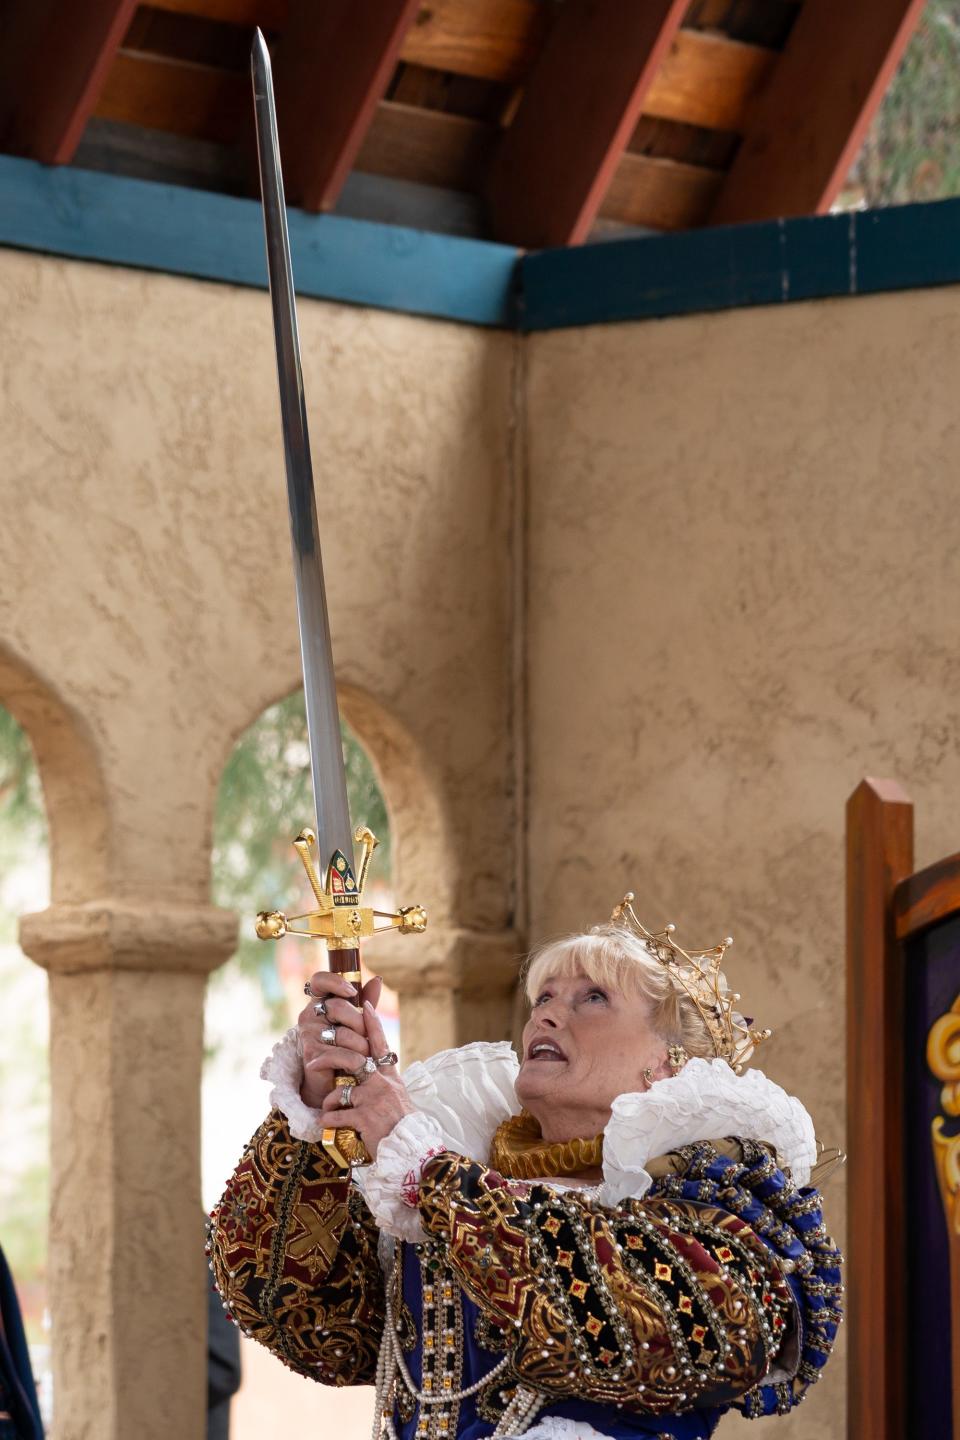 Queen of the Festival, Beckah Rubinstein holds a sword to ceremoniously knight a group of kids at the Renaissance Festival on Feb. 24, 2024 in Gold Canyon, AZ.